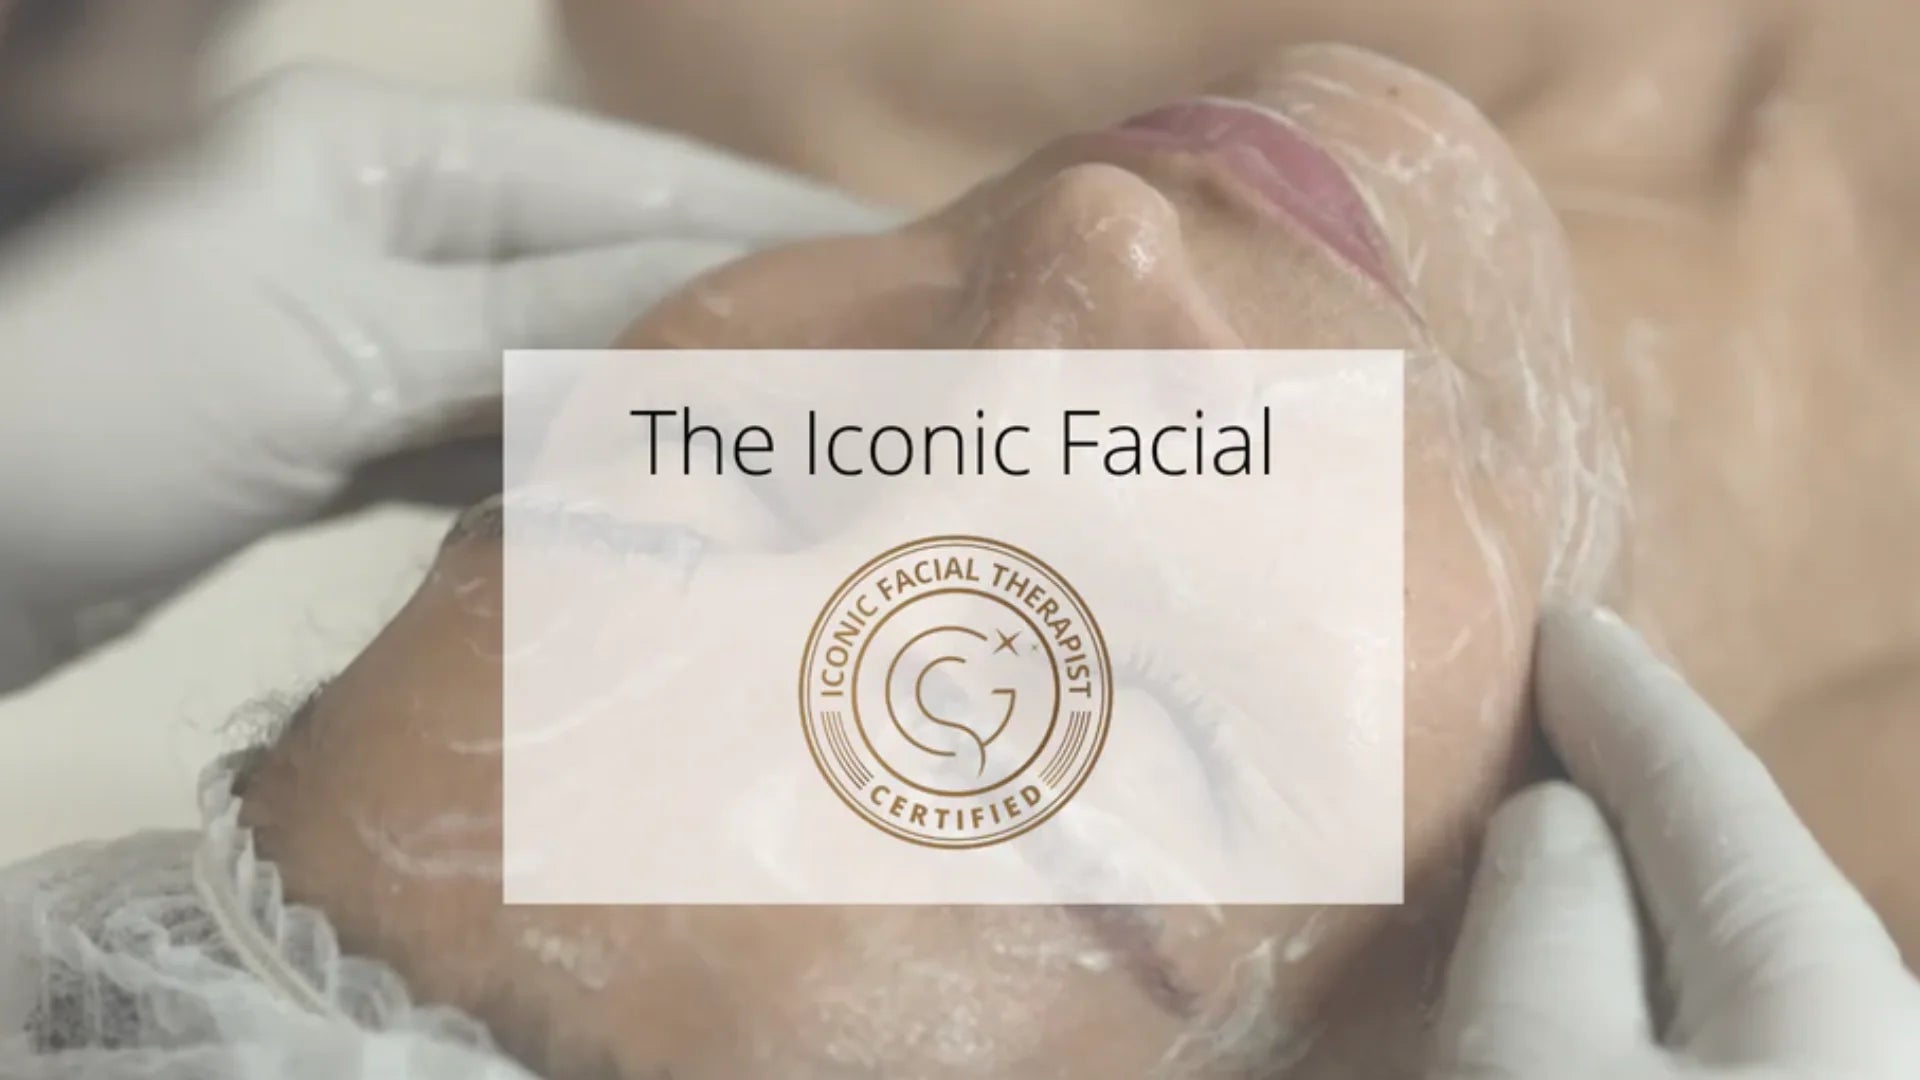 What is the Iconic Facial?